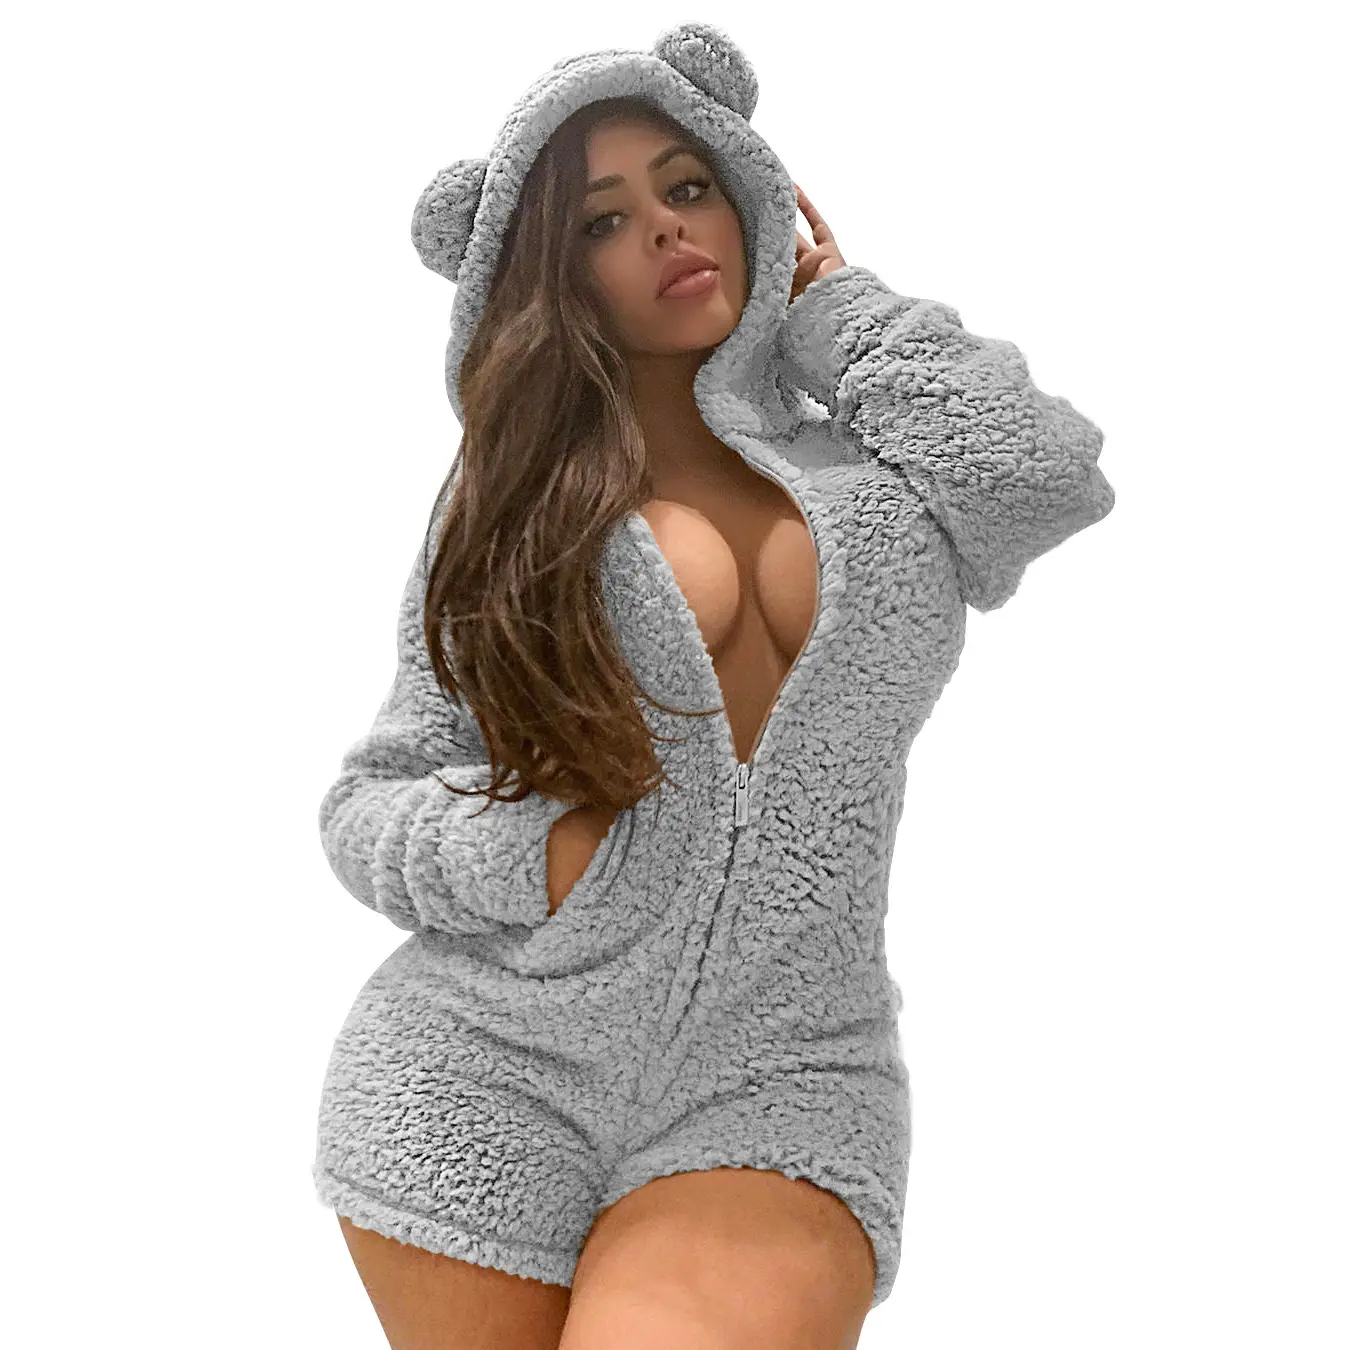 Winter sexy pajamas for women cute hoodies plush conjoined suit home sleepwear clothes with pocket